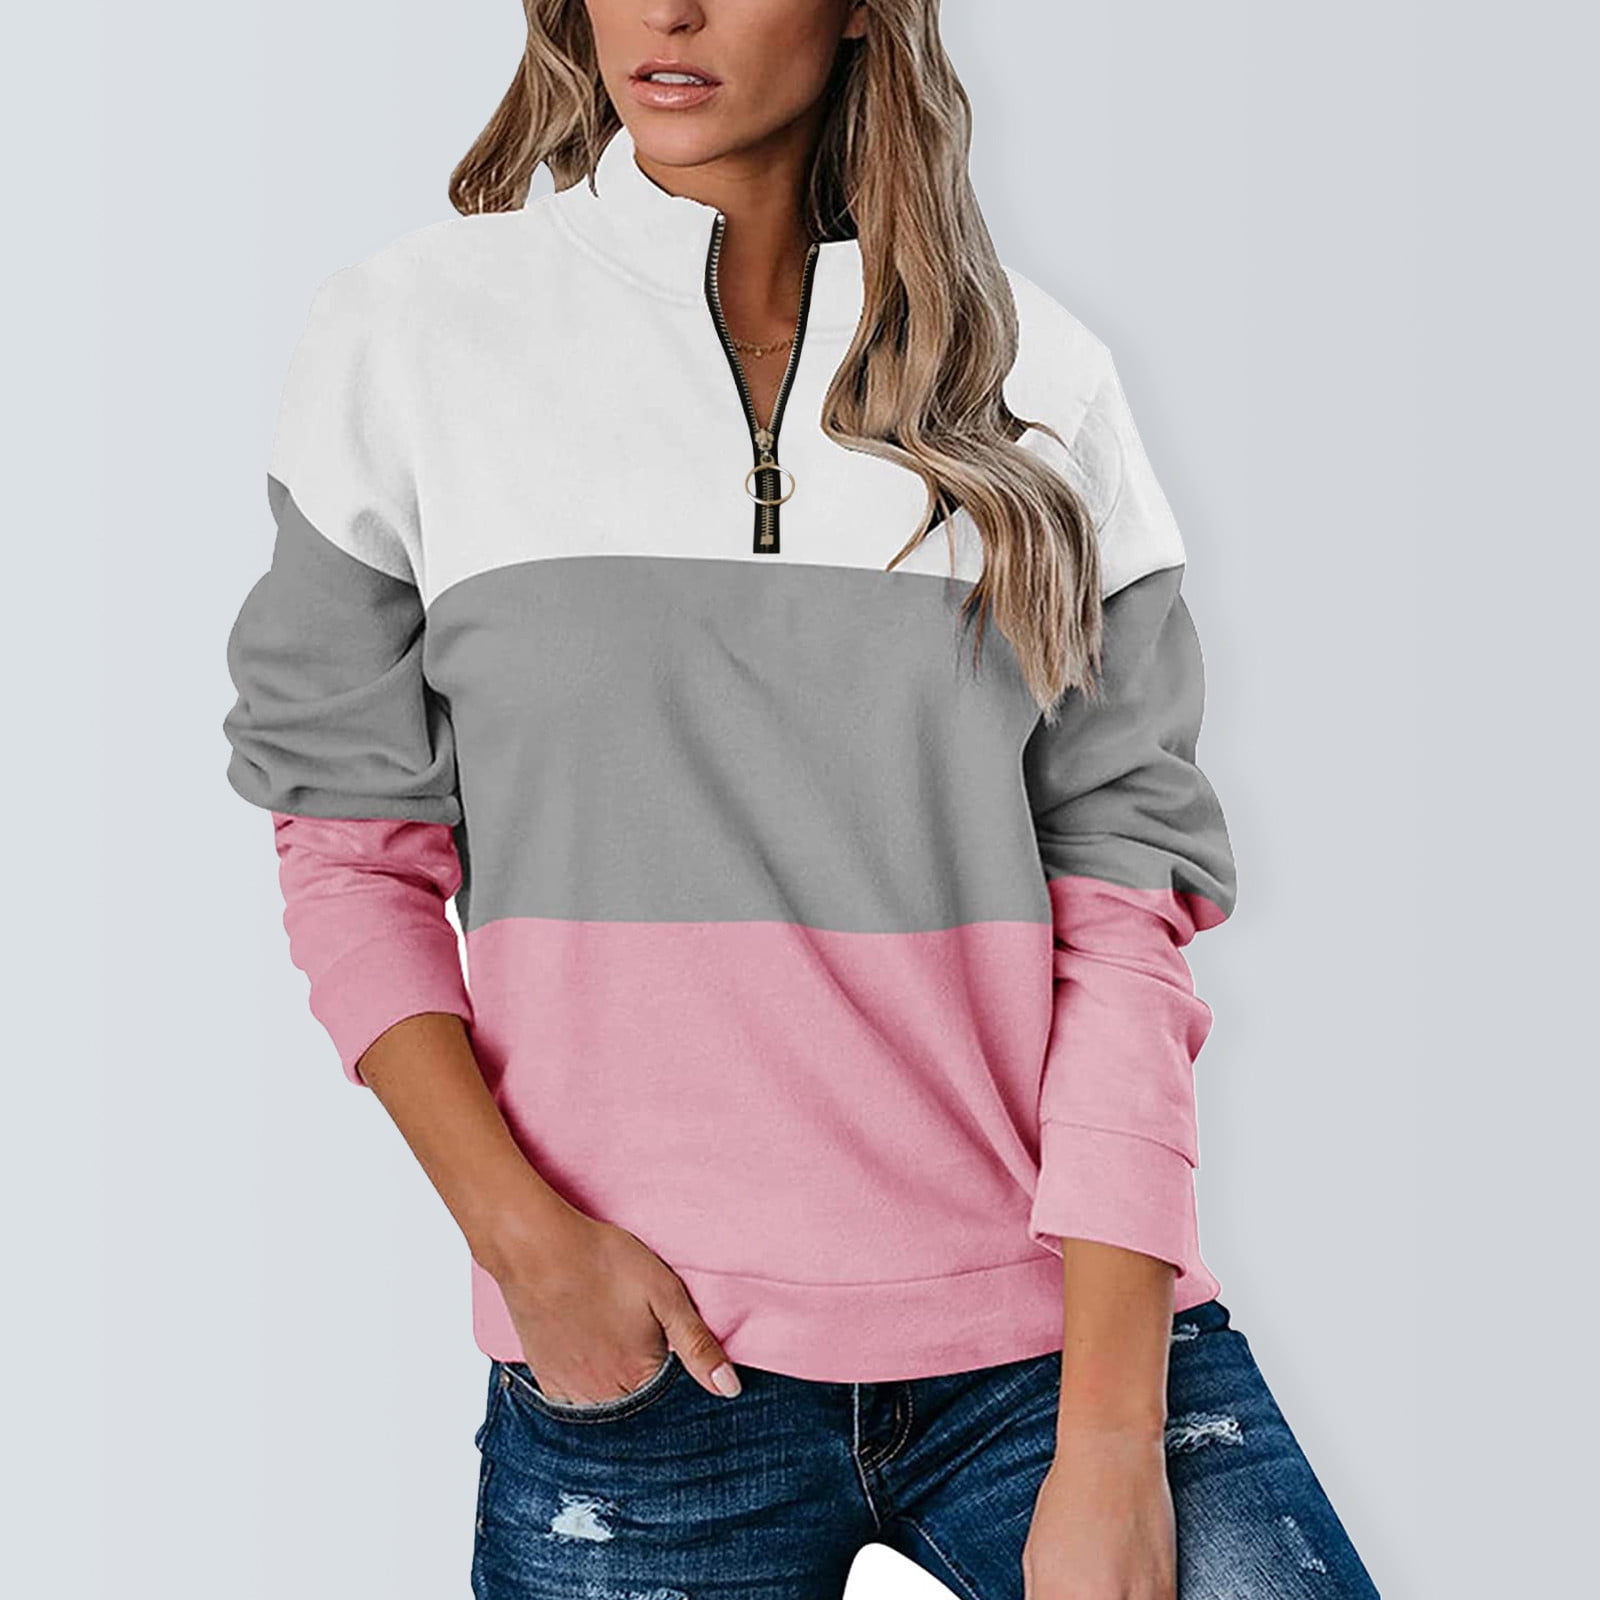 GULE GULE Womens Long Sleeve Pullover Color Block Striped Double Hooded Patchwork Leightweight Sweatshirts